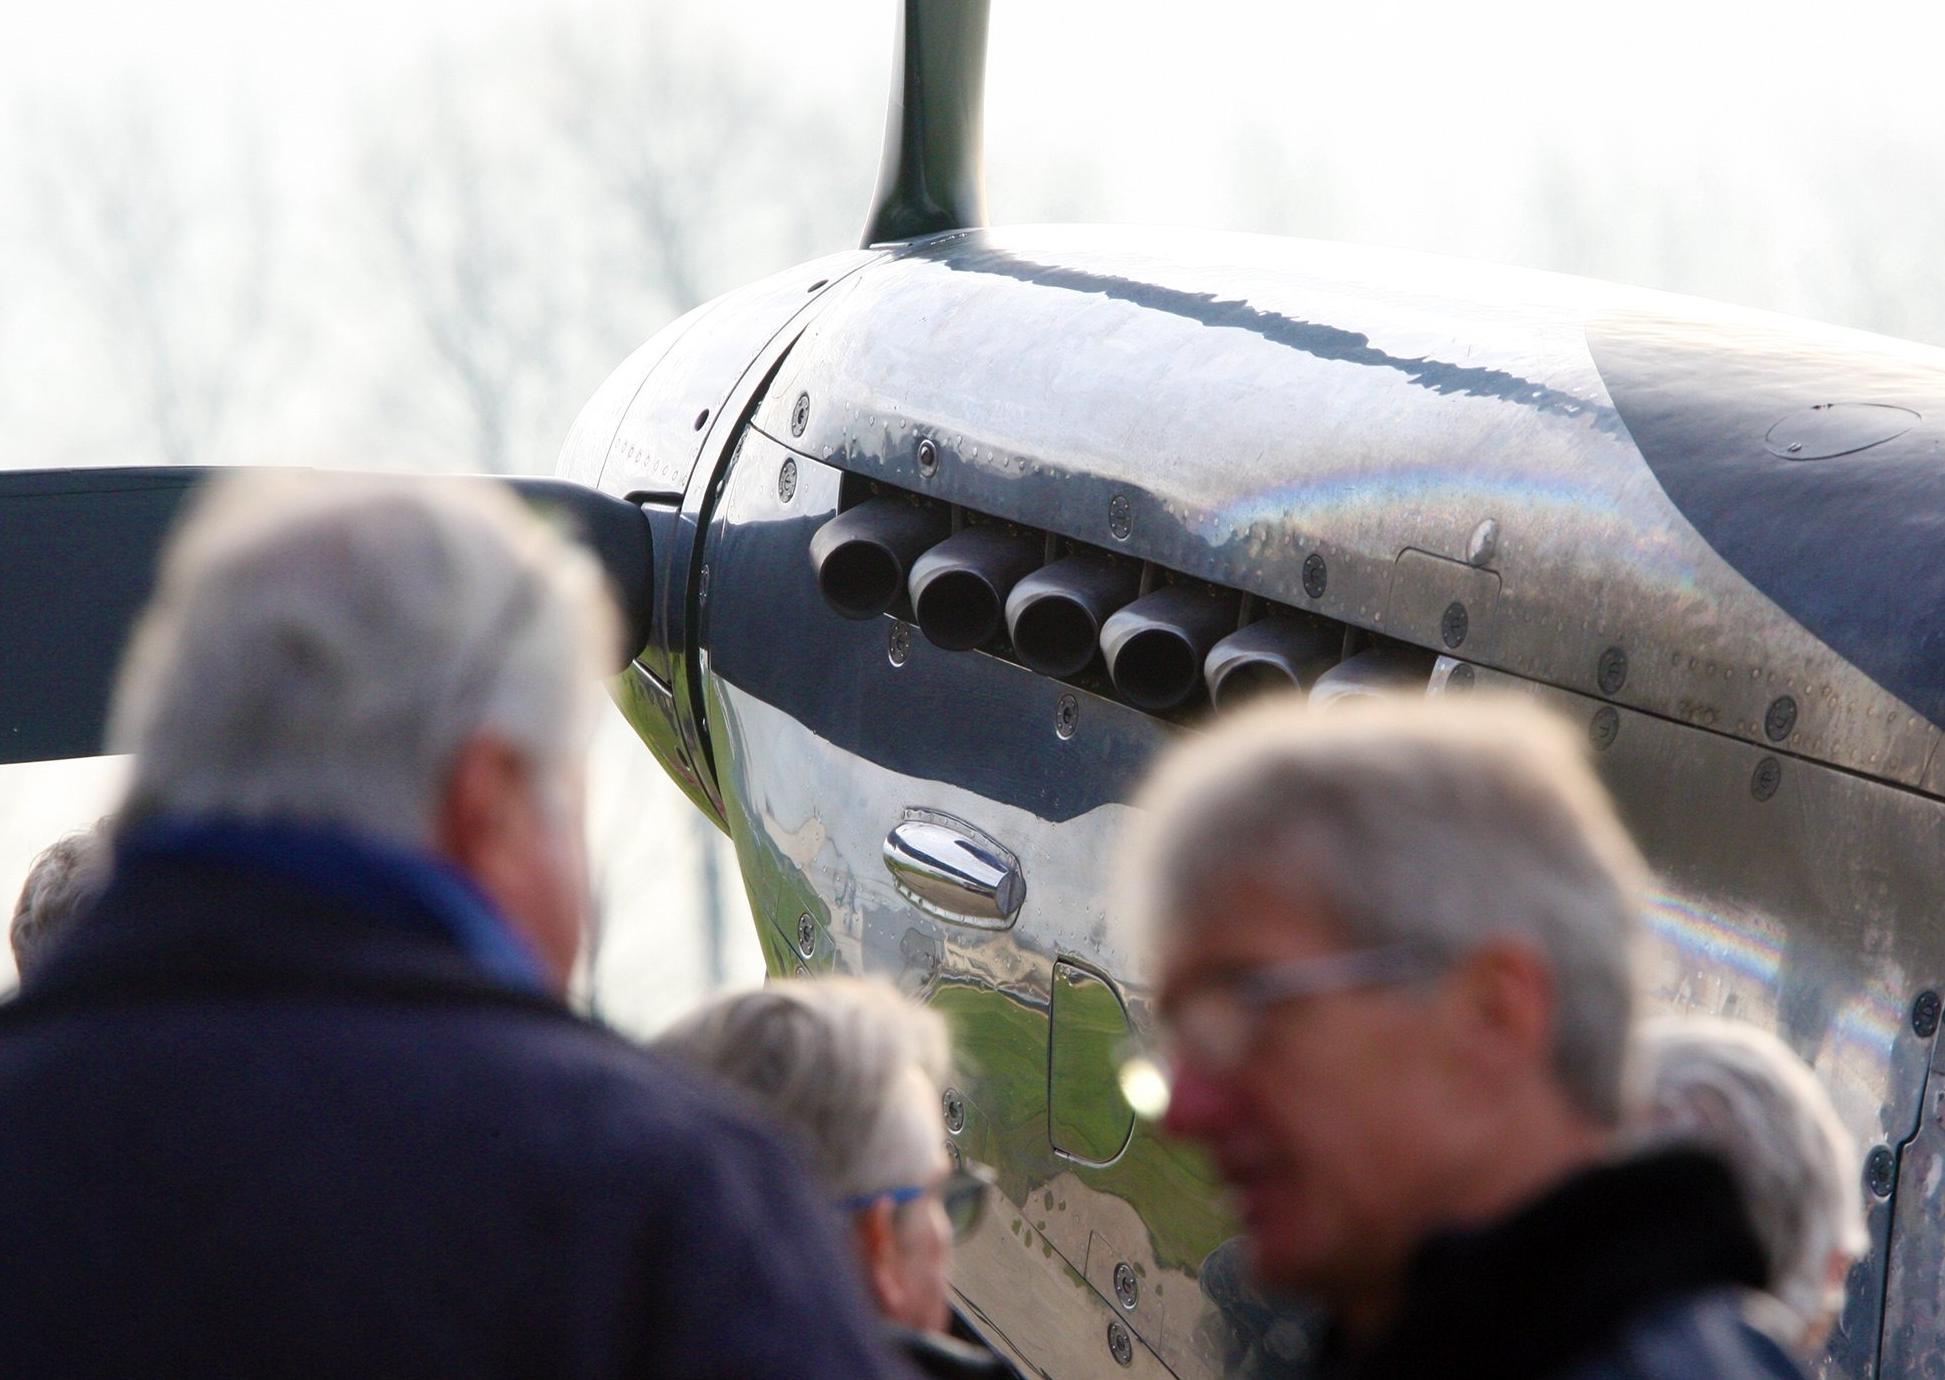 DM19121109a.jpg. A newly-restored spitfire aircraft lands at Goodwood following a 27,000 mile journey around the world. Photo by Derek Martin Photography. SUS-190512-171127008